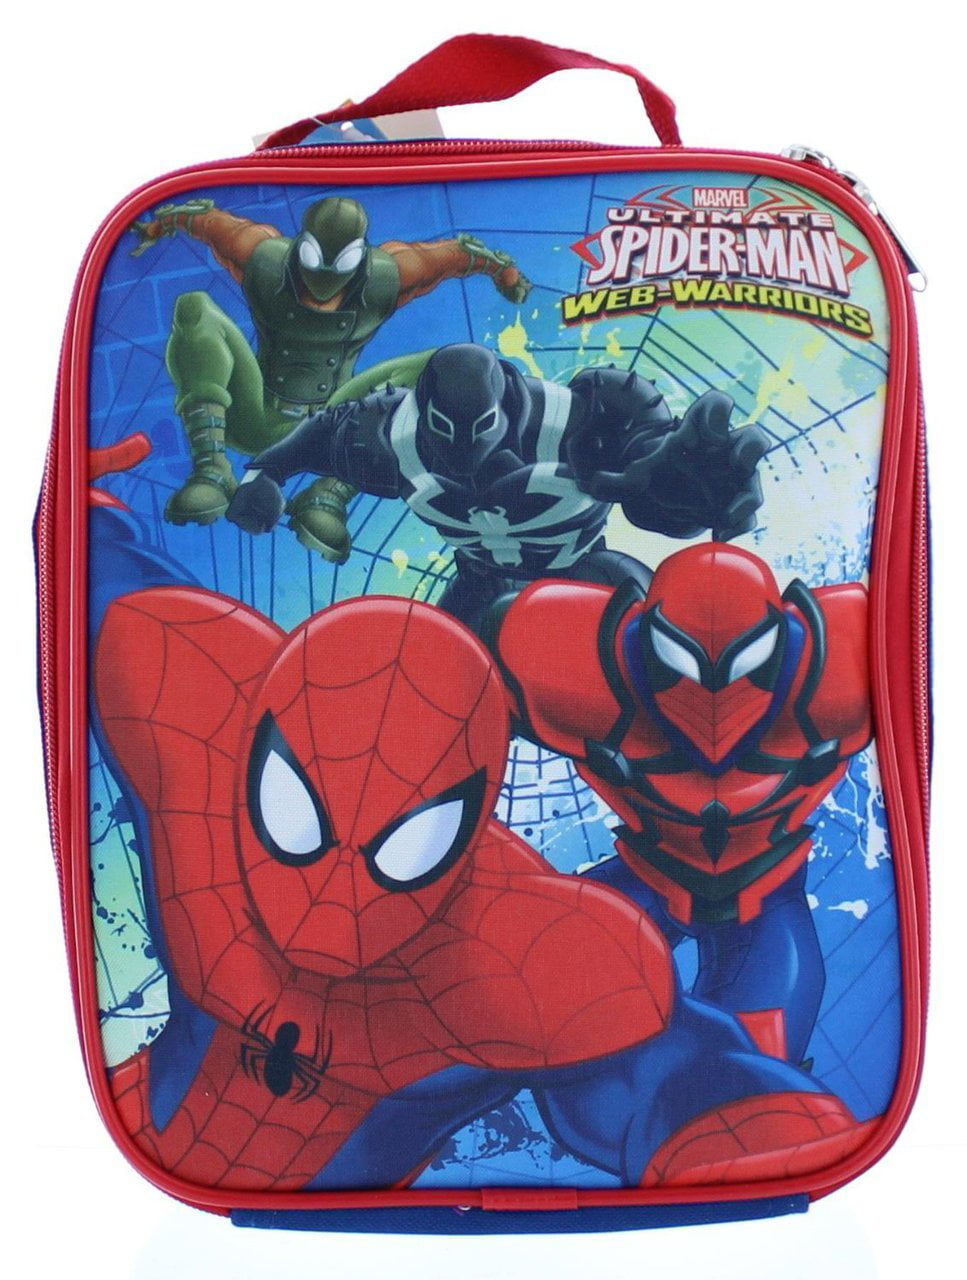 Marvel Spiderman Insulated Lunch Bag Lunch Box Walmart